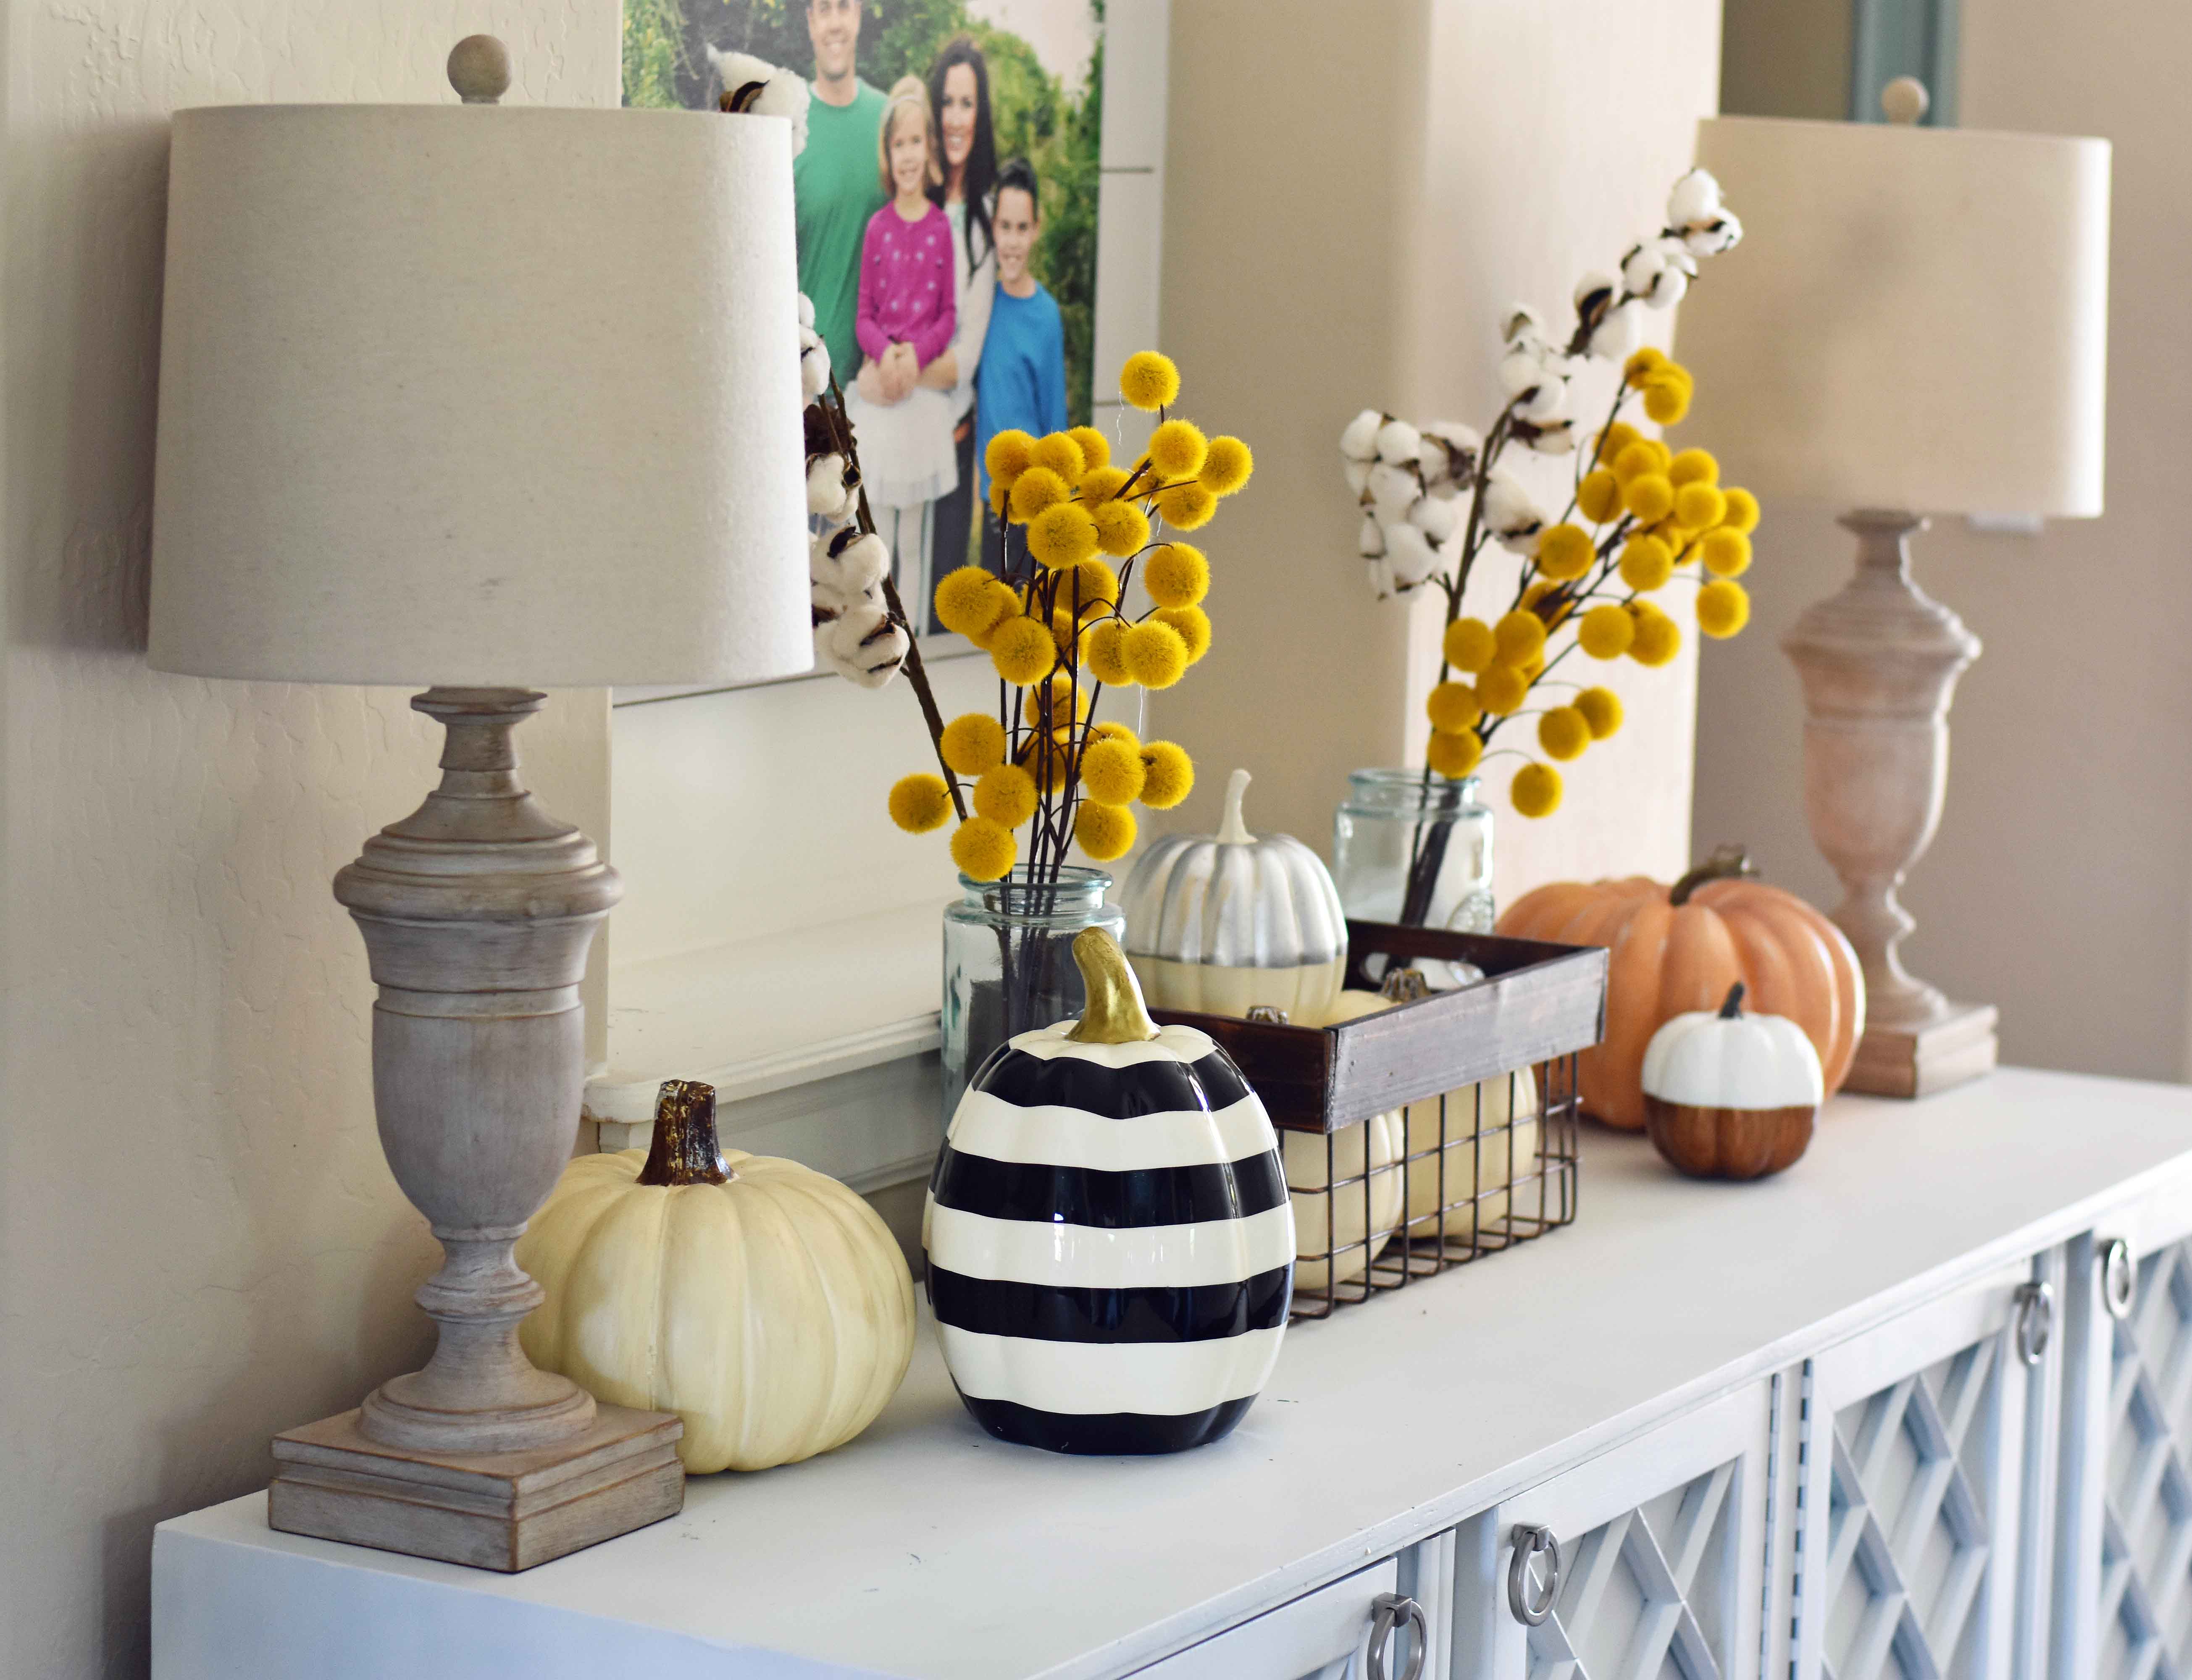 Fall Entry Decor Ideas. Craspedia Yellow Billy Ball Flowers in vintage vases. White pumpkins in wire baskets. Black and white striped pumpkin. Natural lamps, white entry table, and fall decor. Fixer Upper cotton ball stems. How to decorate your home for Fall.